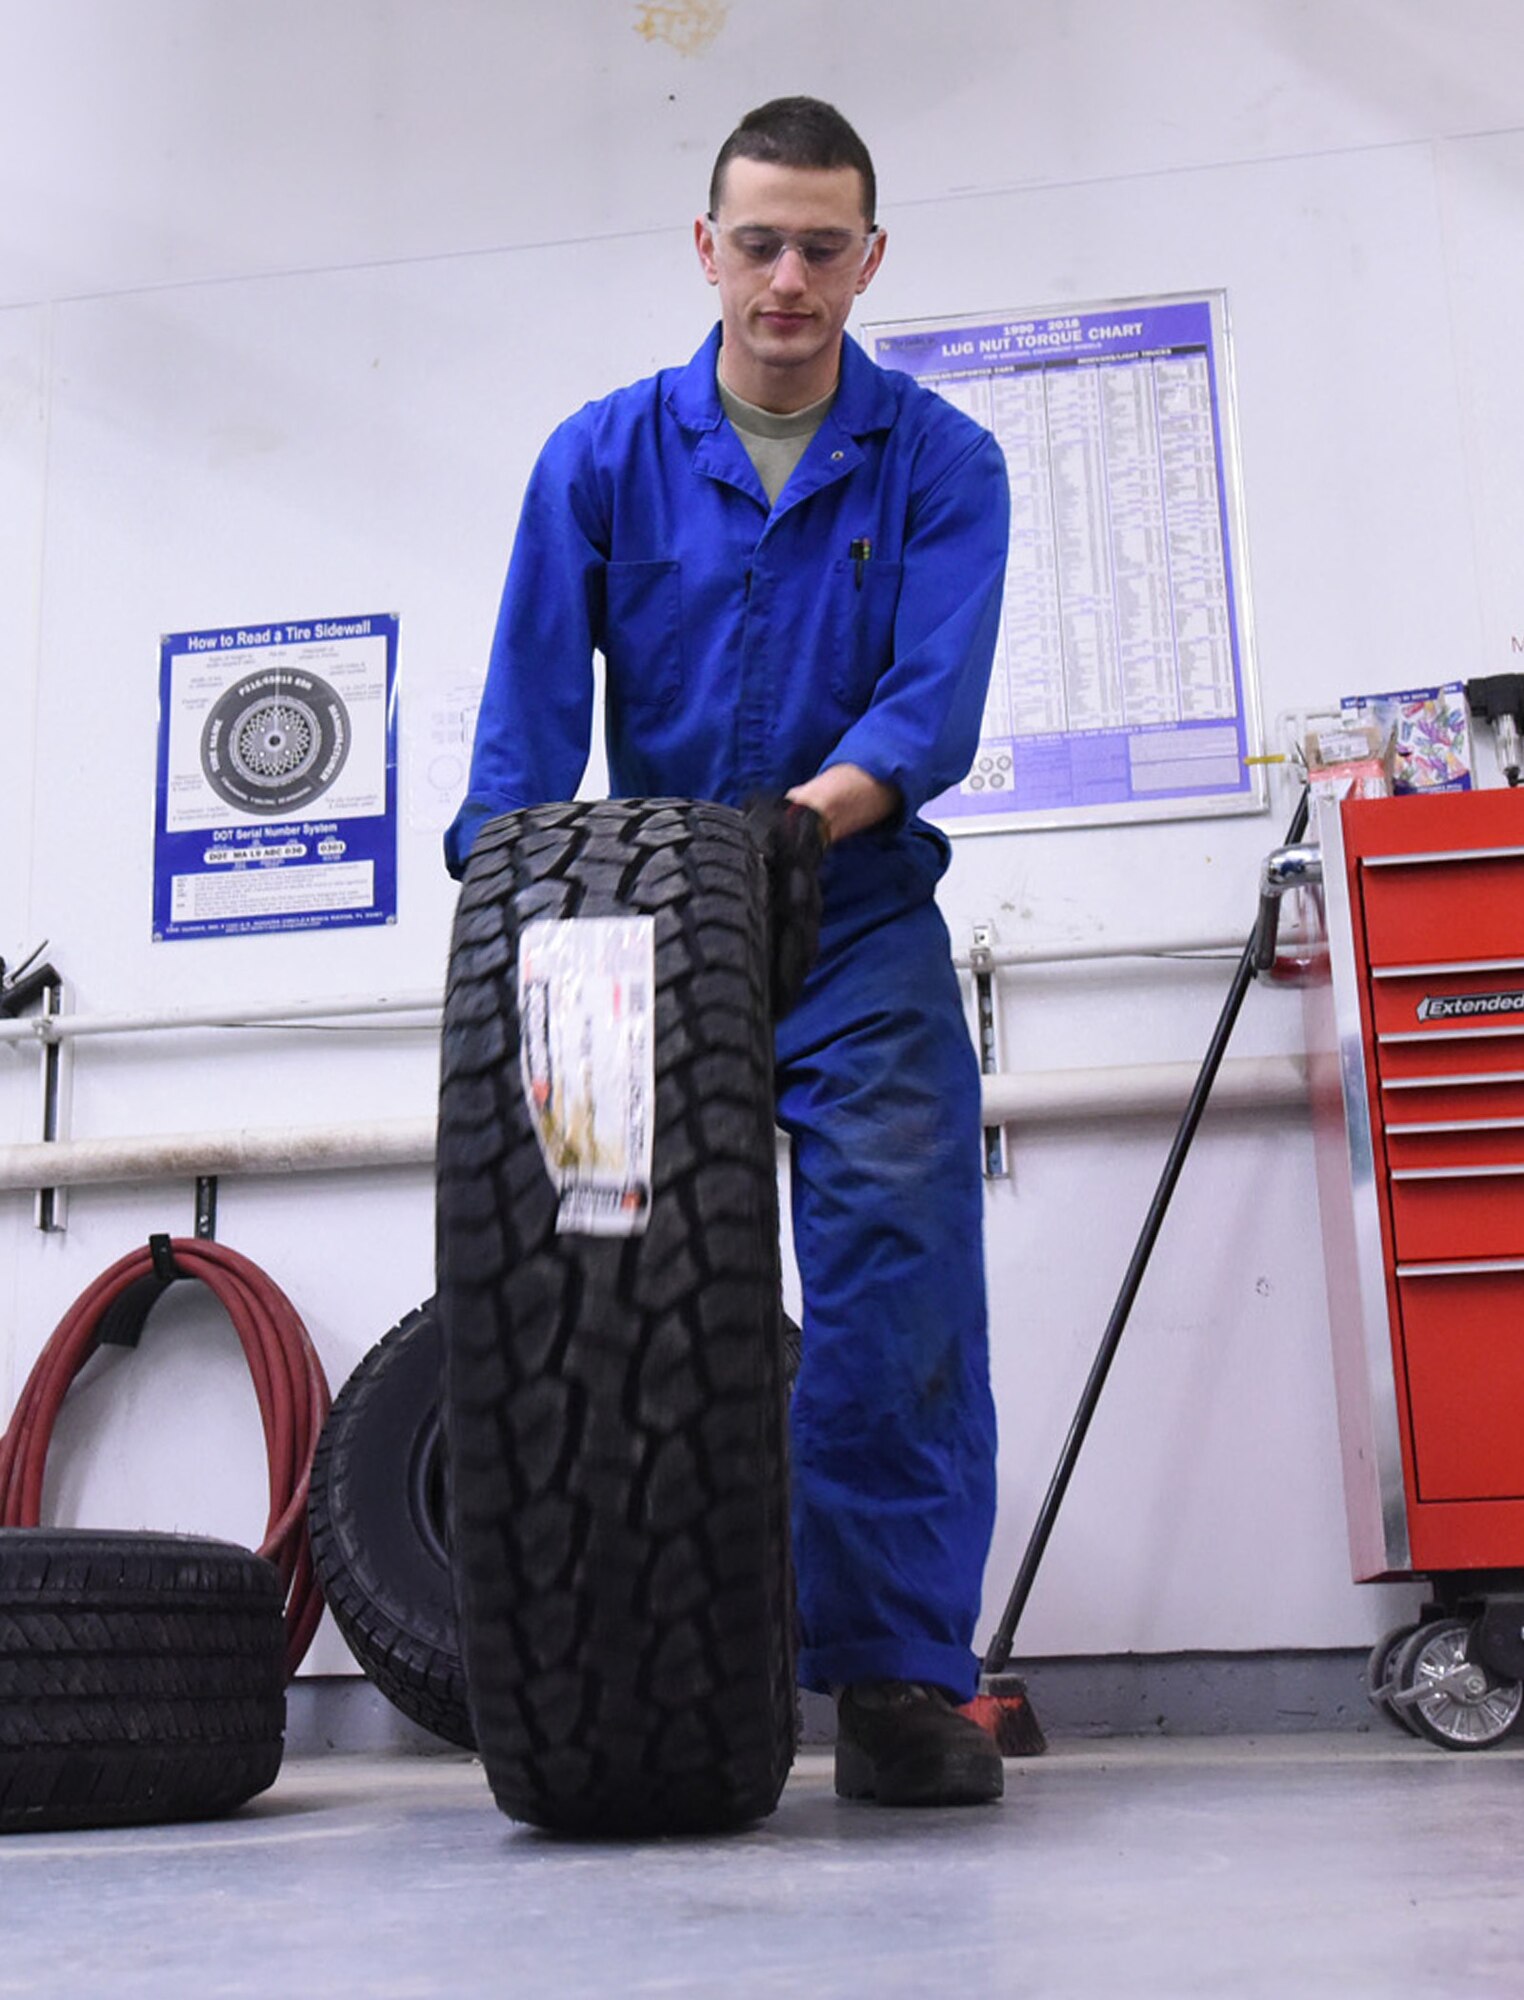 Airman 1st Class Jonathan Allen, 341st Logistics Readiness Squadron vehicle maintenance apprentice, rolls a tire to a tire machine at the LRS tire shop Dec. 1, 2016, at Malmstrom Air Force Base, Mont. The tire machine is used to make it easier to conduct work on the tire. (U.S. Air Force photo/Senior Airman Jaeda Tookes)